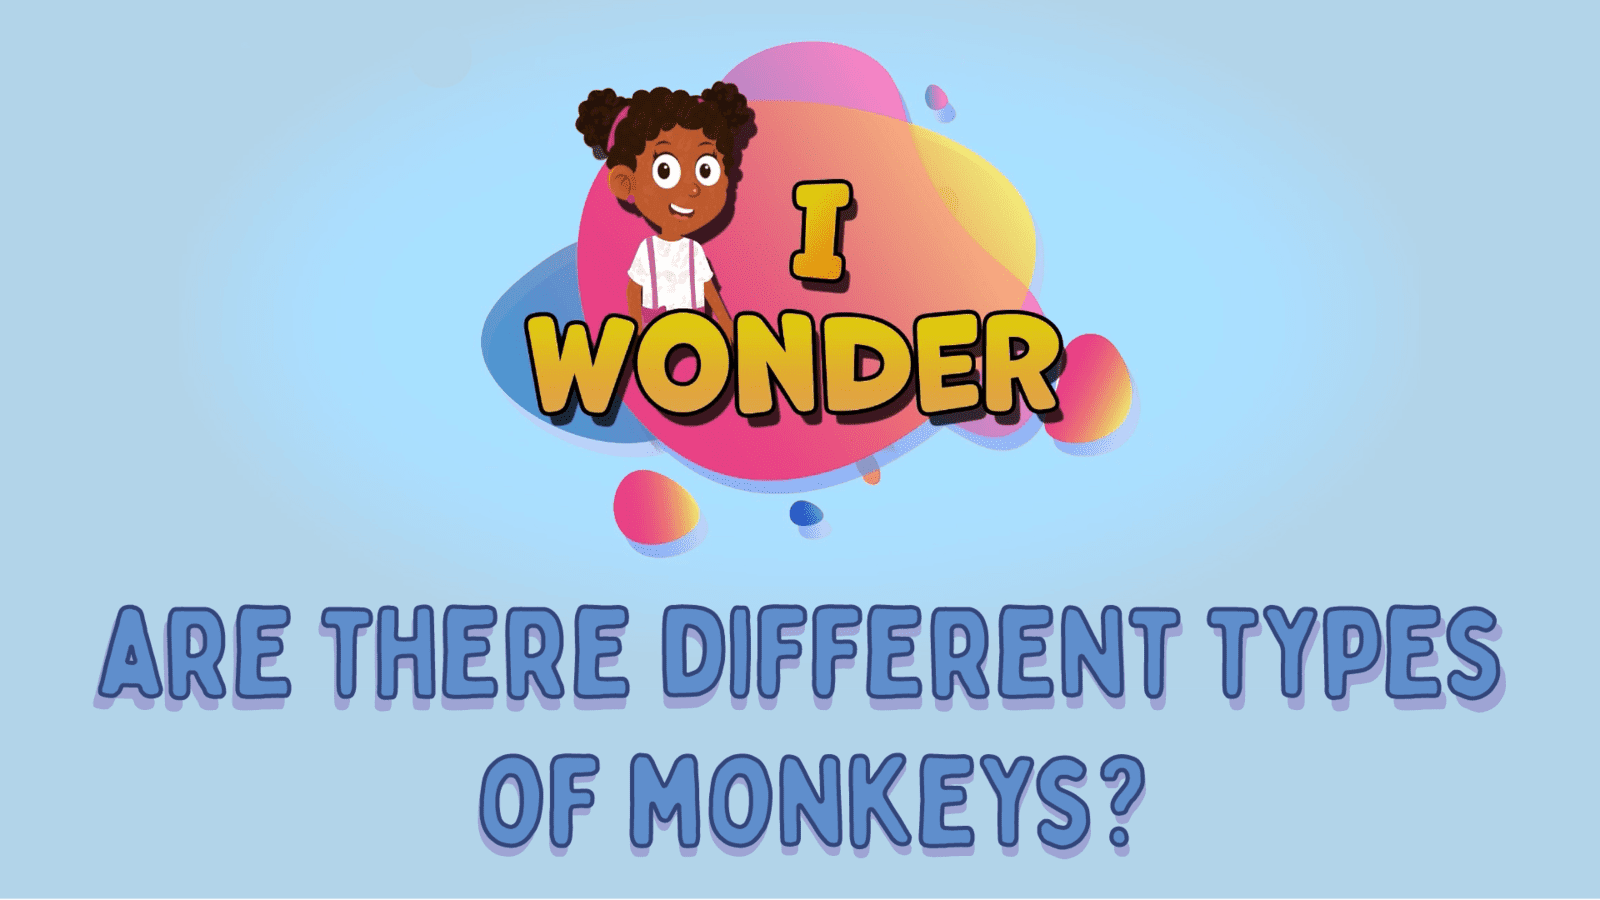 Are There Different Types Of Monkeys?